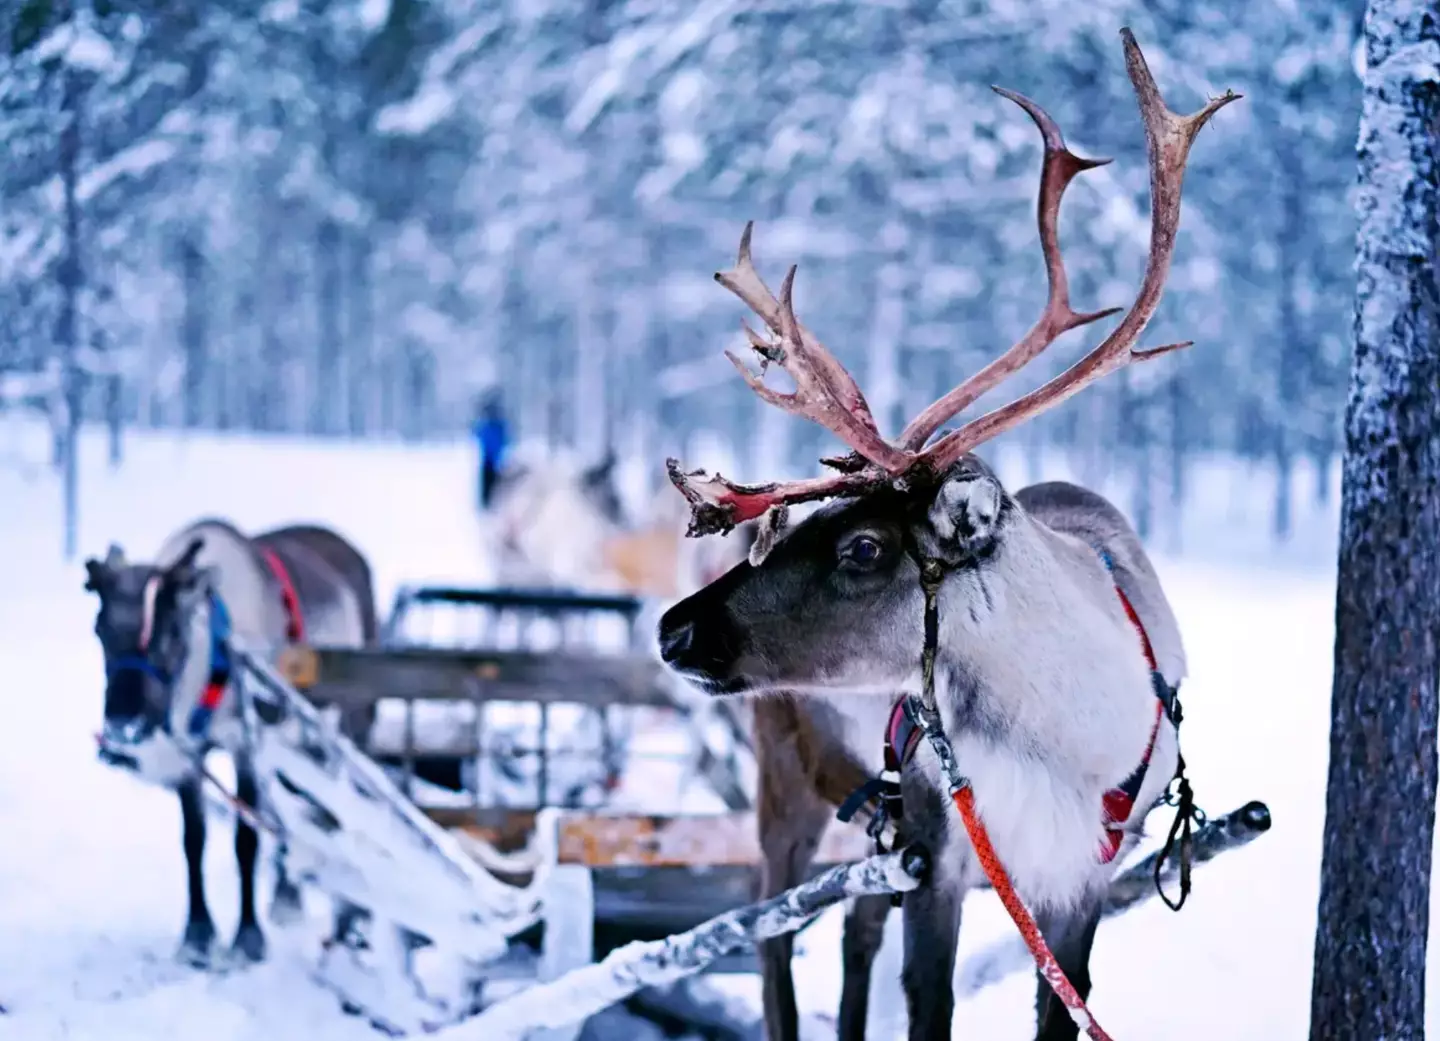 Once you've picked up your treats, you can leave them out for Rudolph and the other reindeers (